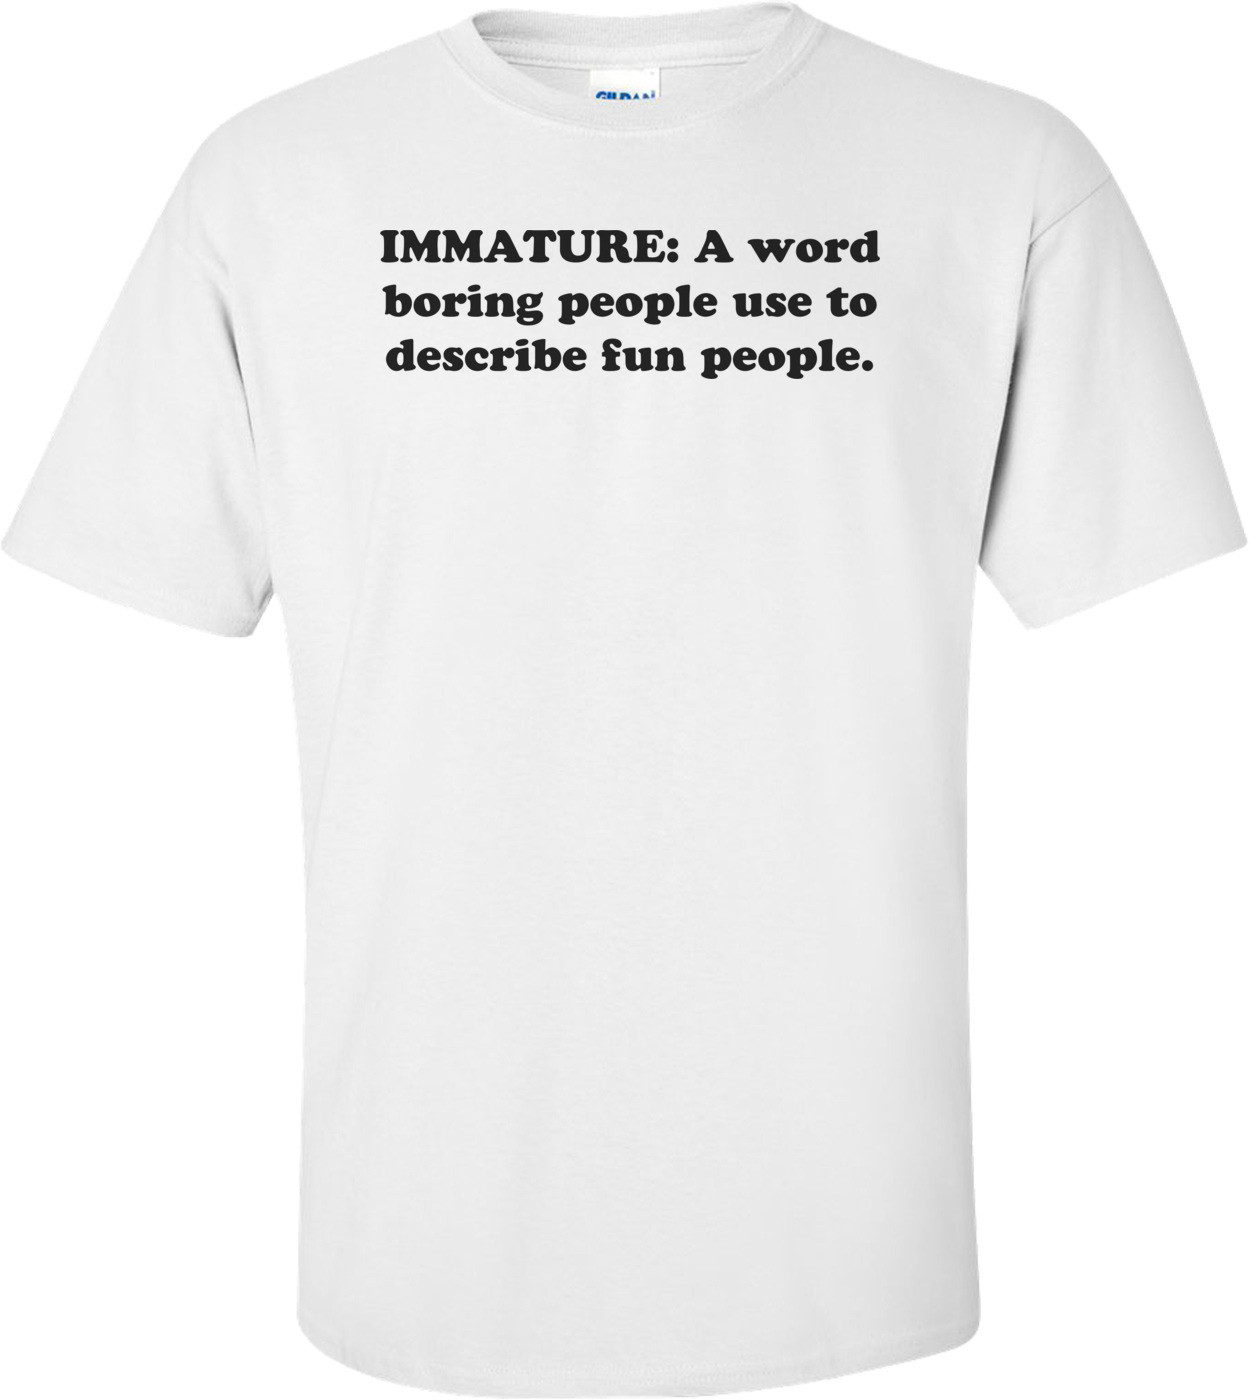 IMMATURE: A word boring people use to describe fun people. Shirt